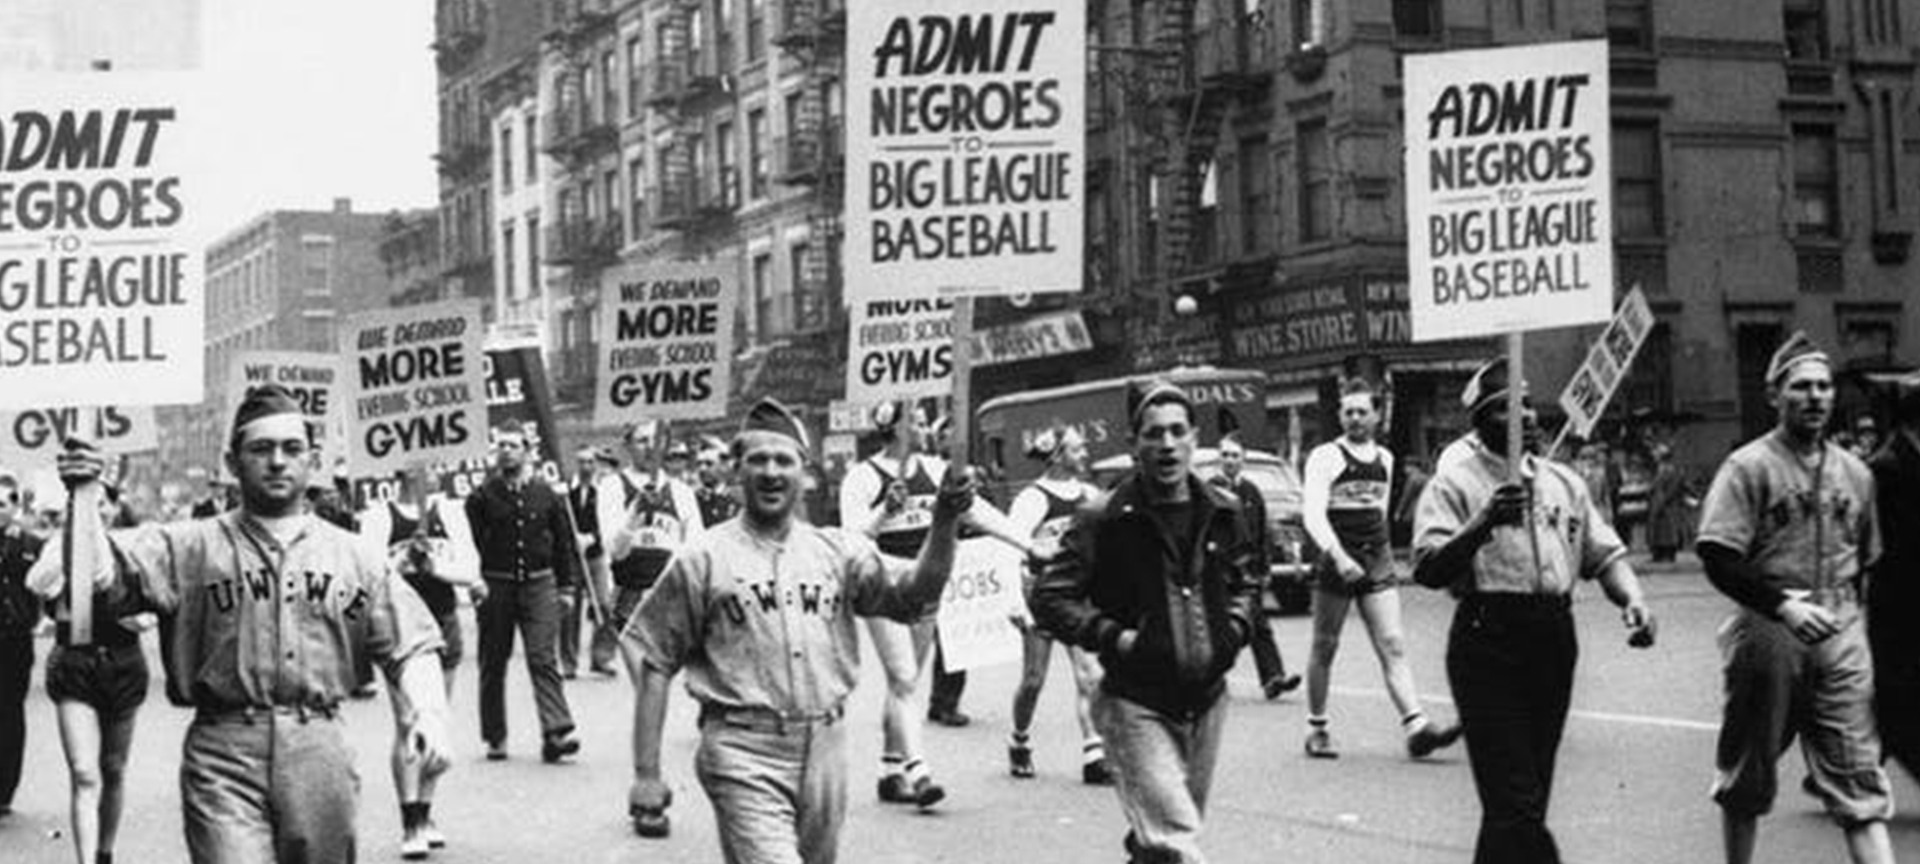 People marching holding signs for African American rights.